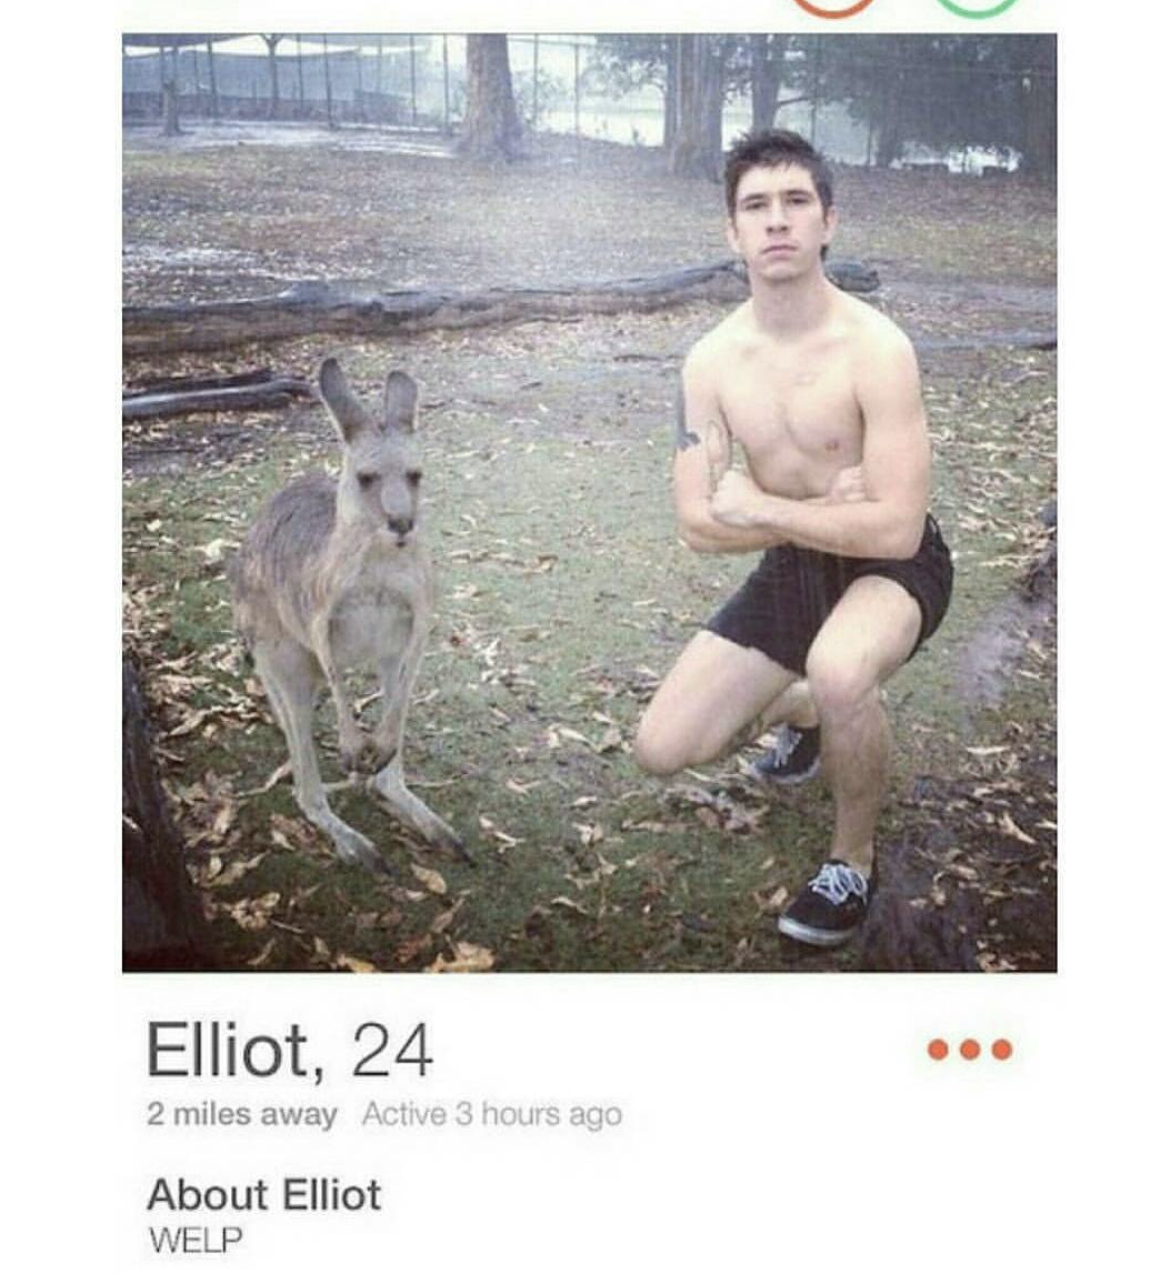 cool pic kangaroo - Elliot, 24 2 miles away Active 3 hours ago About Elliot Welp